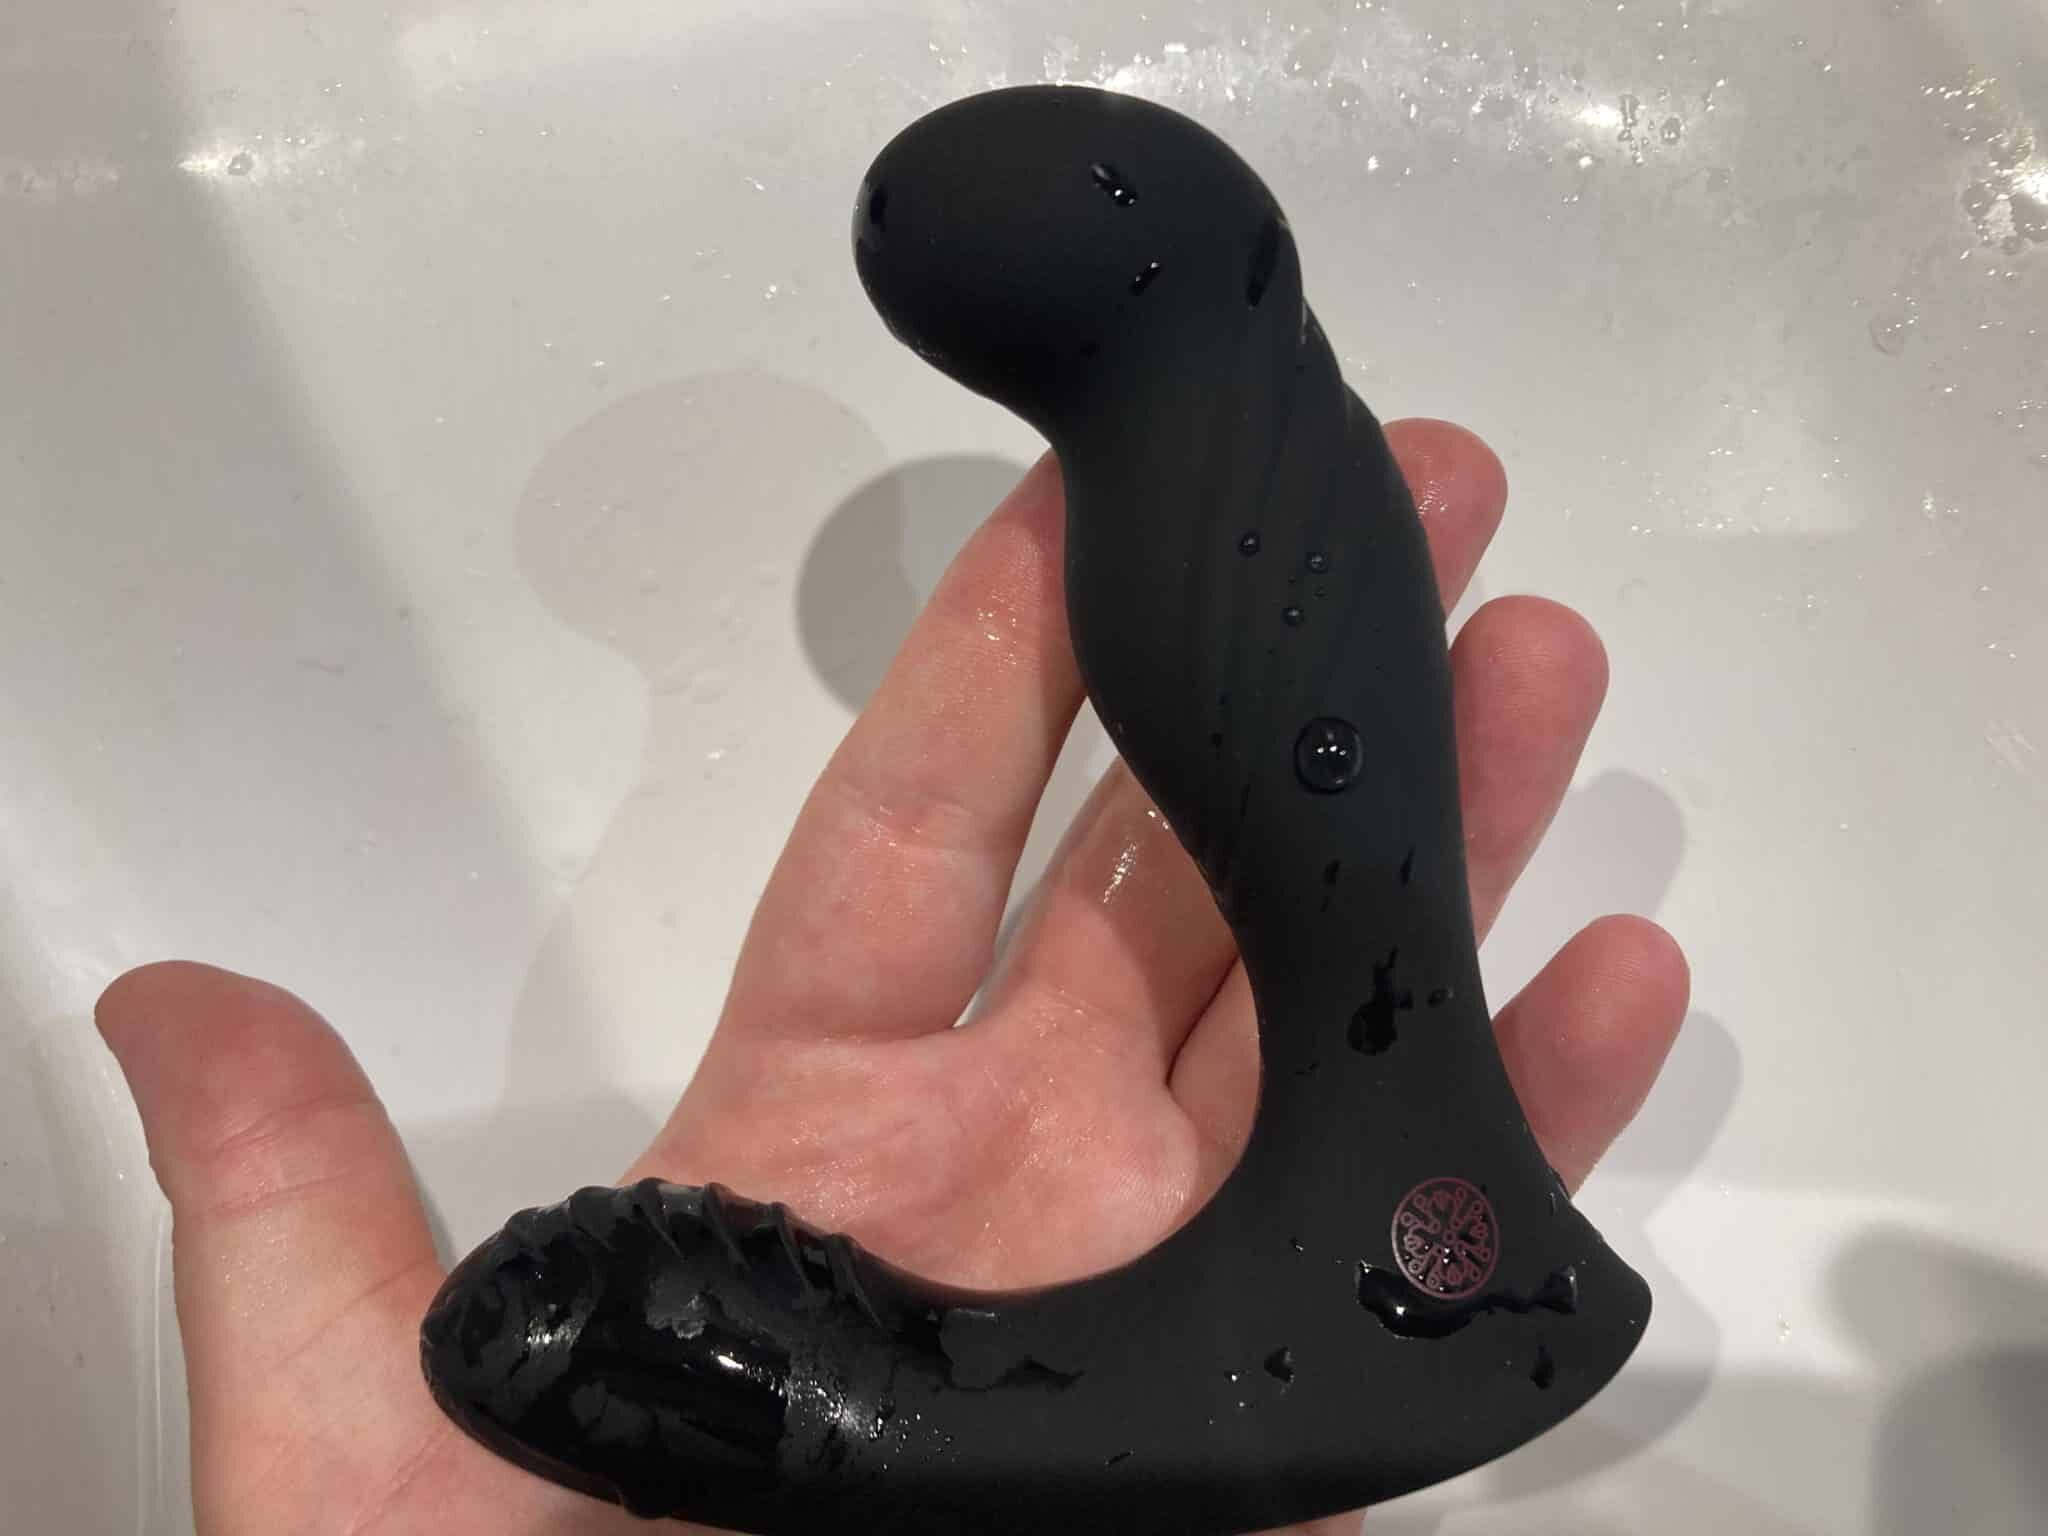 Mantric Remote Control Prostate Vibrator Exploring the Materials and Care